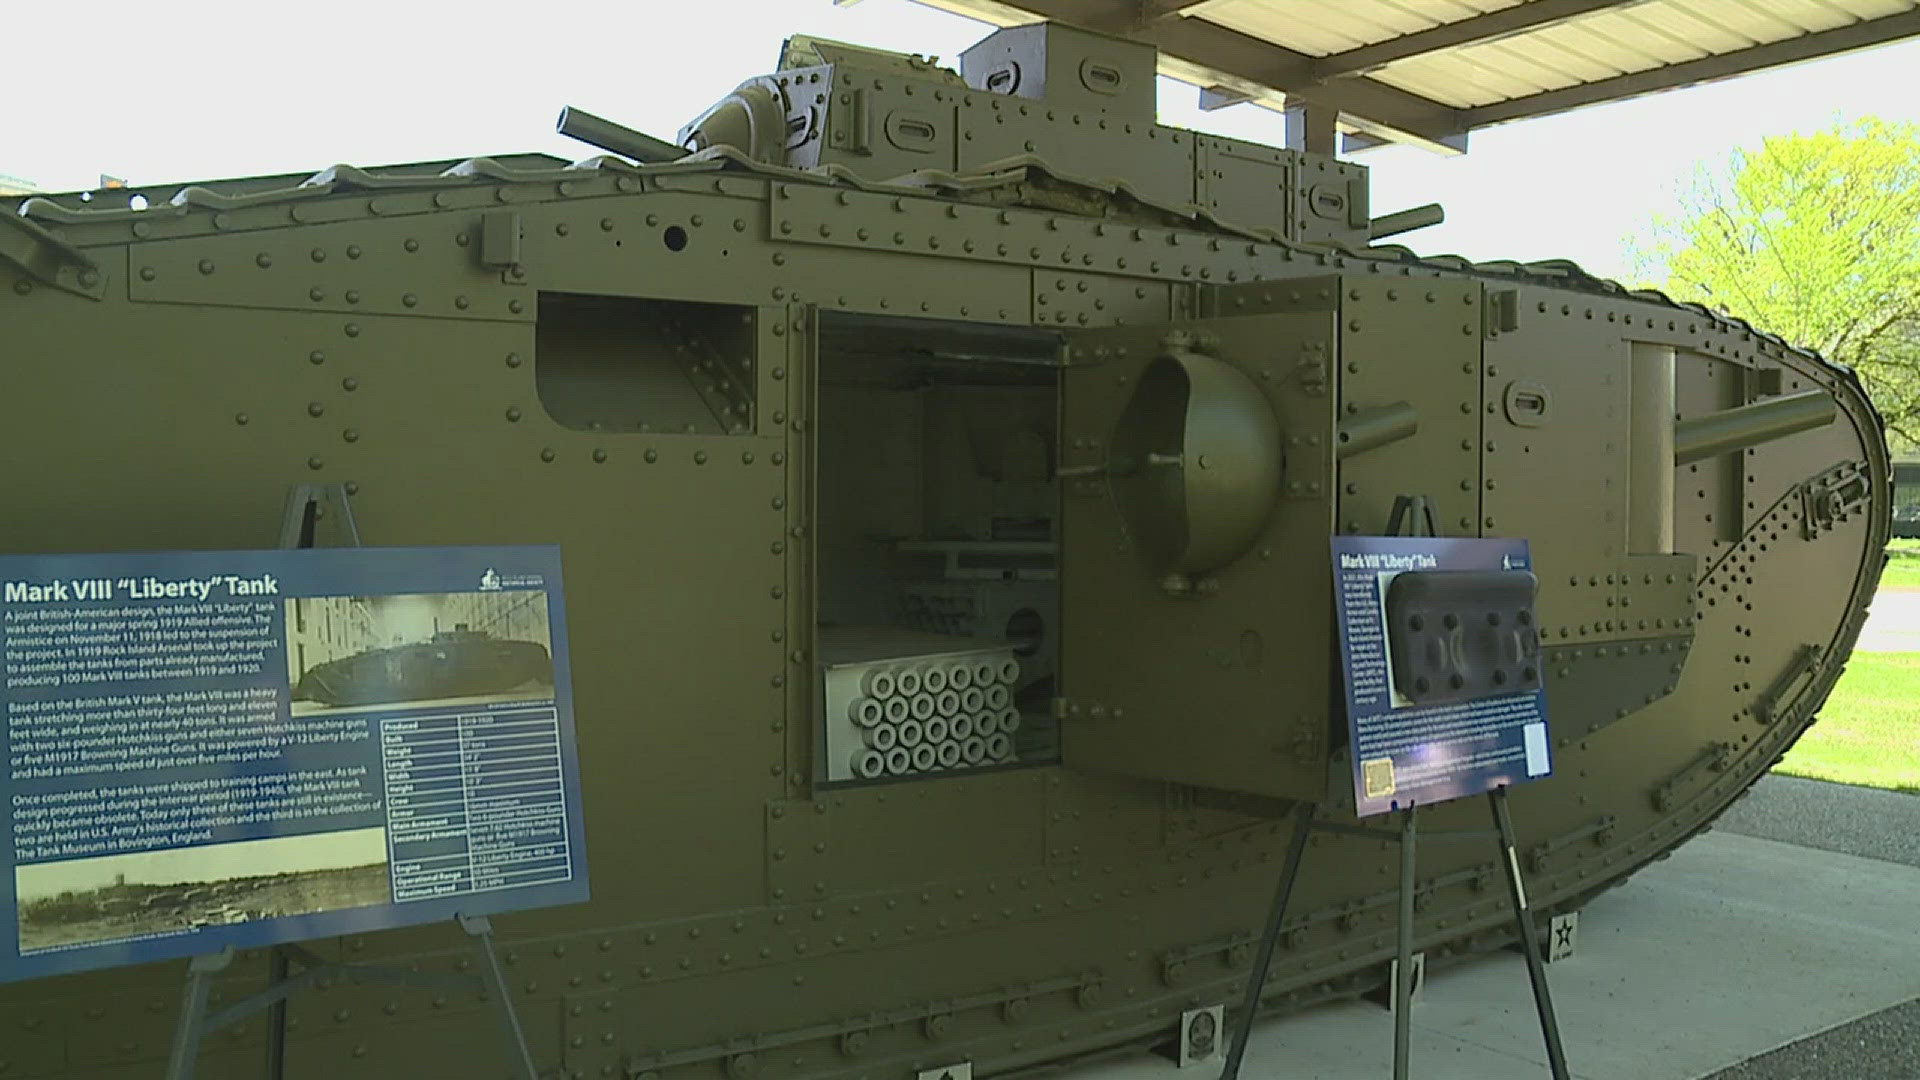 A ribbon-cutting ceremony for the Mark VIII Liberty Tank was held on April 30.